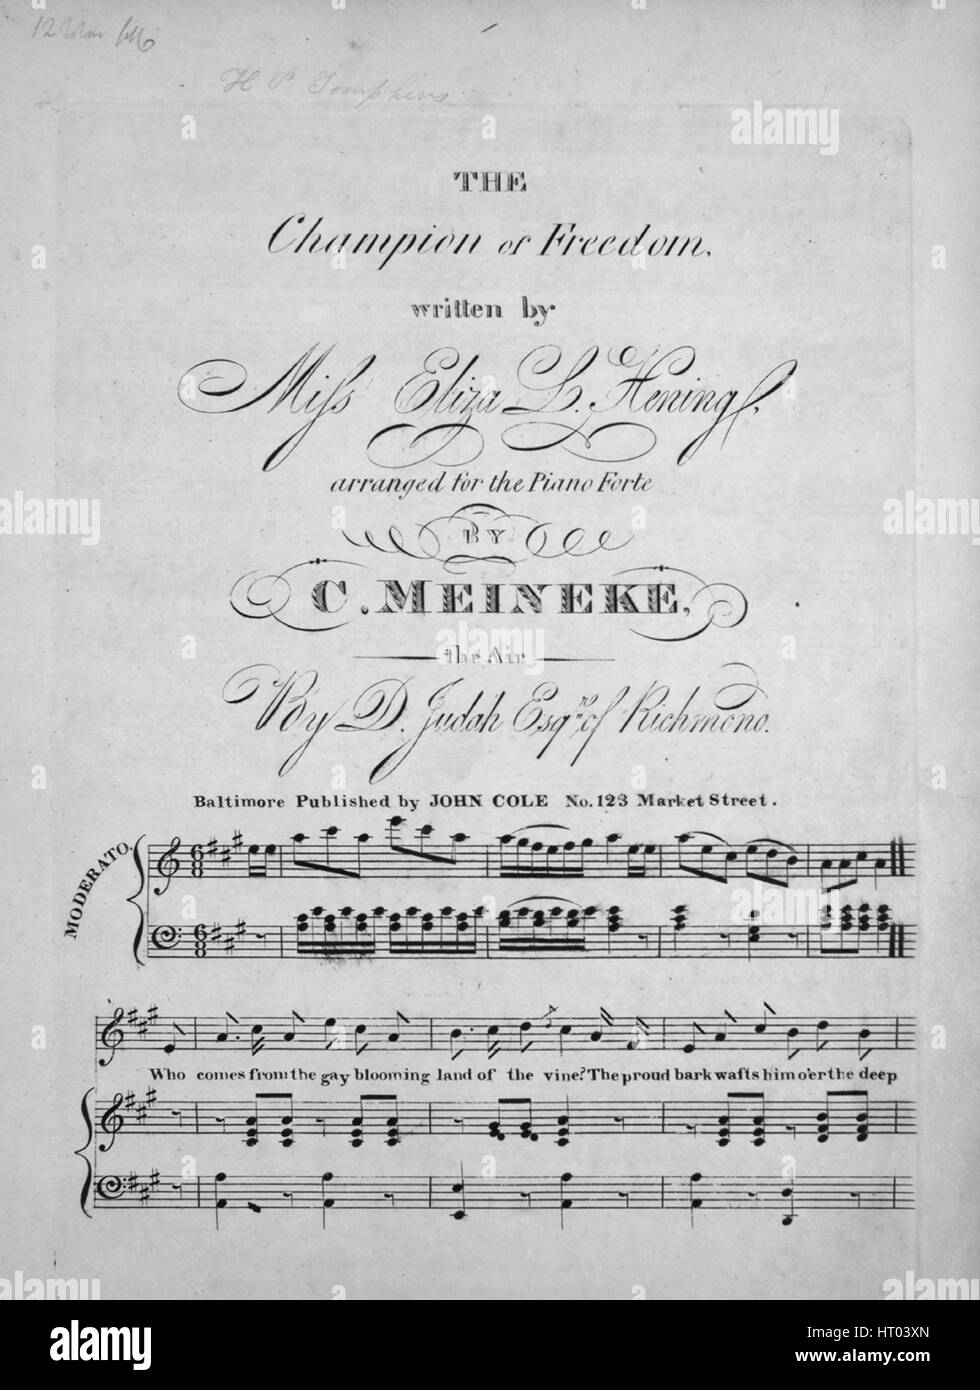 music cover image of the song 'The Champion of Freedom', with original authorship reading 'Written by Miss Eliza L Hening Arranged for the Piano Forte C Meineke The Air